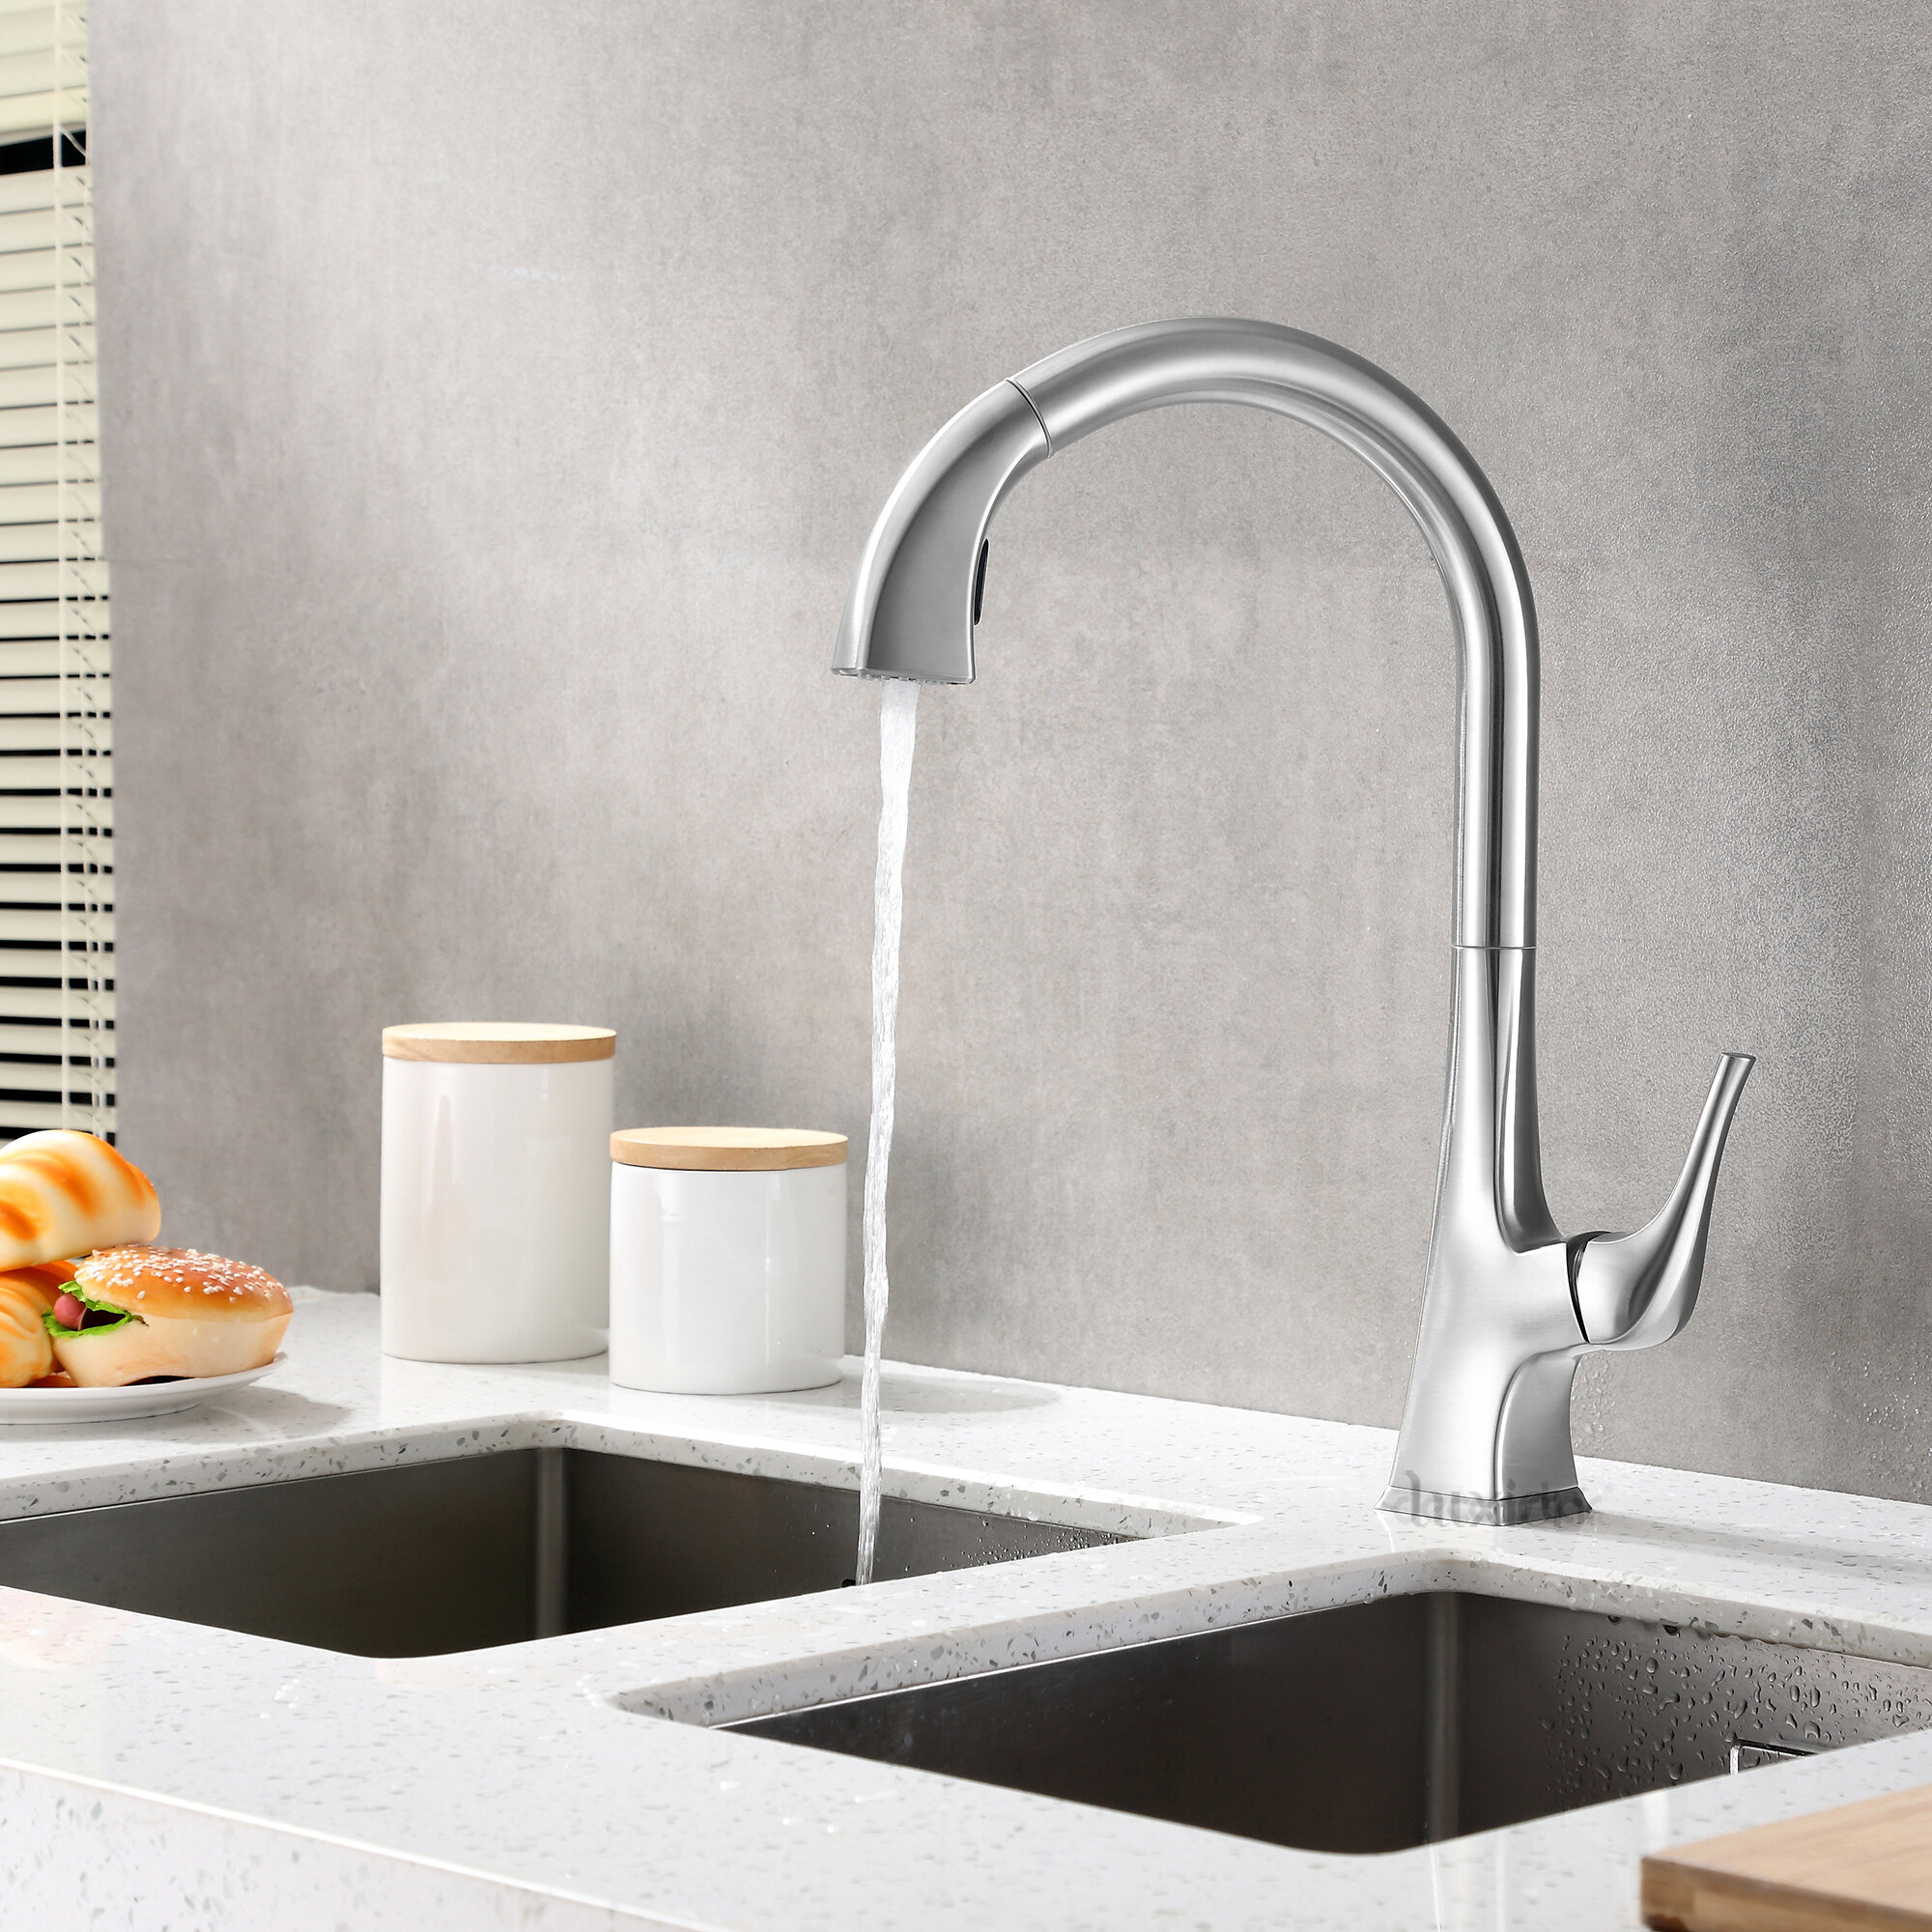 Stainless Steel Kitchen Sinks And Modern Faucets Functional